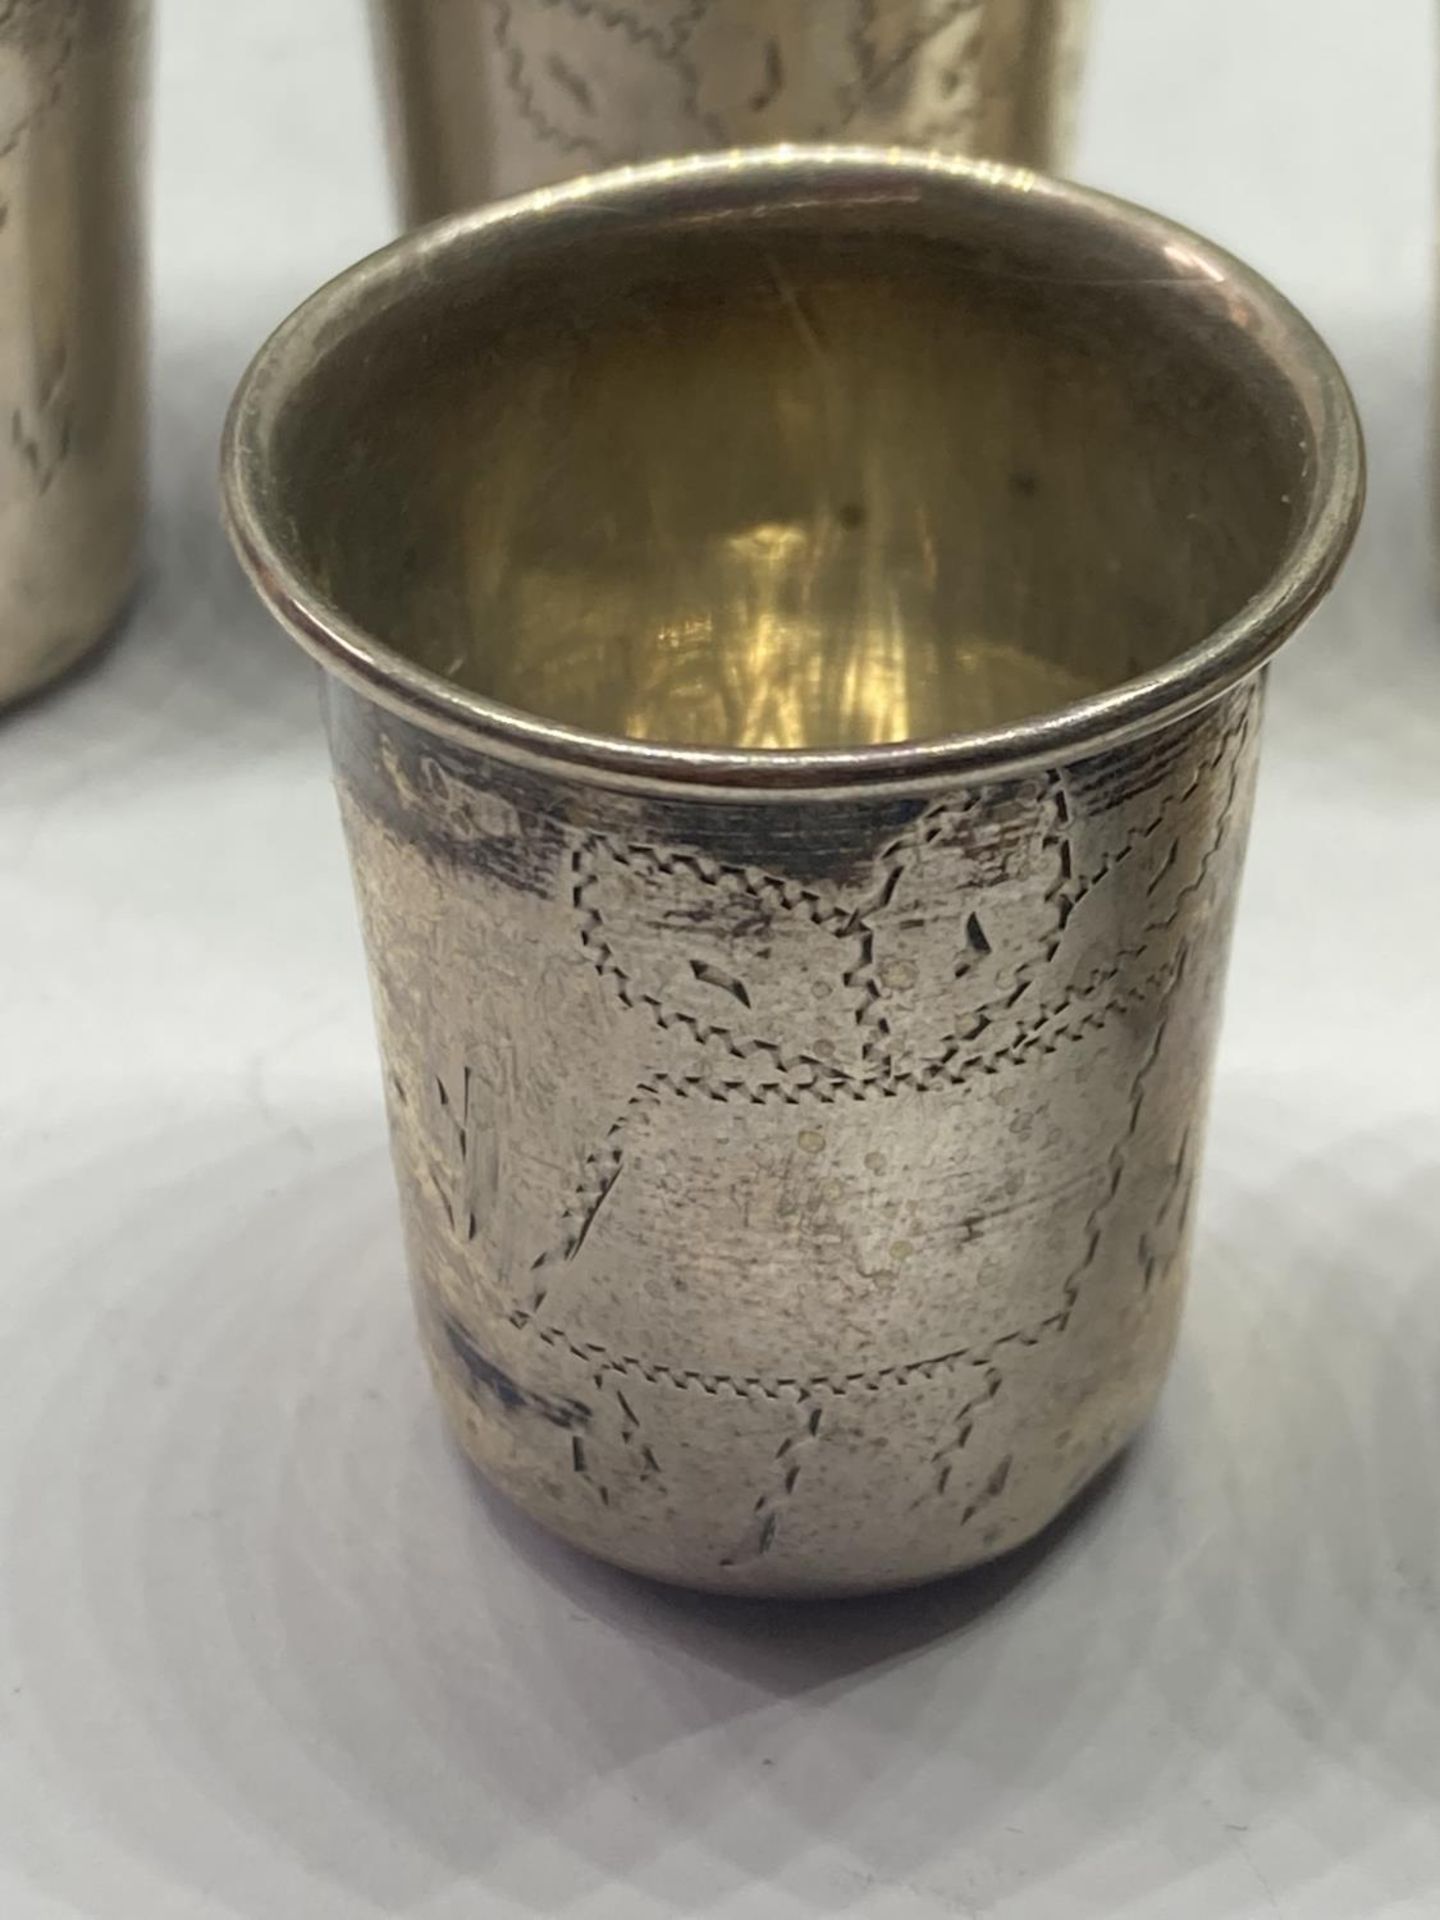 SIX STIRRUP CUPS MARKET LO SILVER 833 GROSS WEIGHT 48 GRAMS - Image 2 of 4